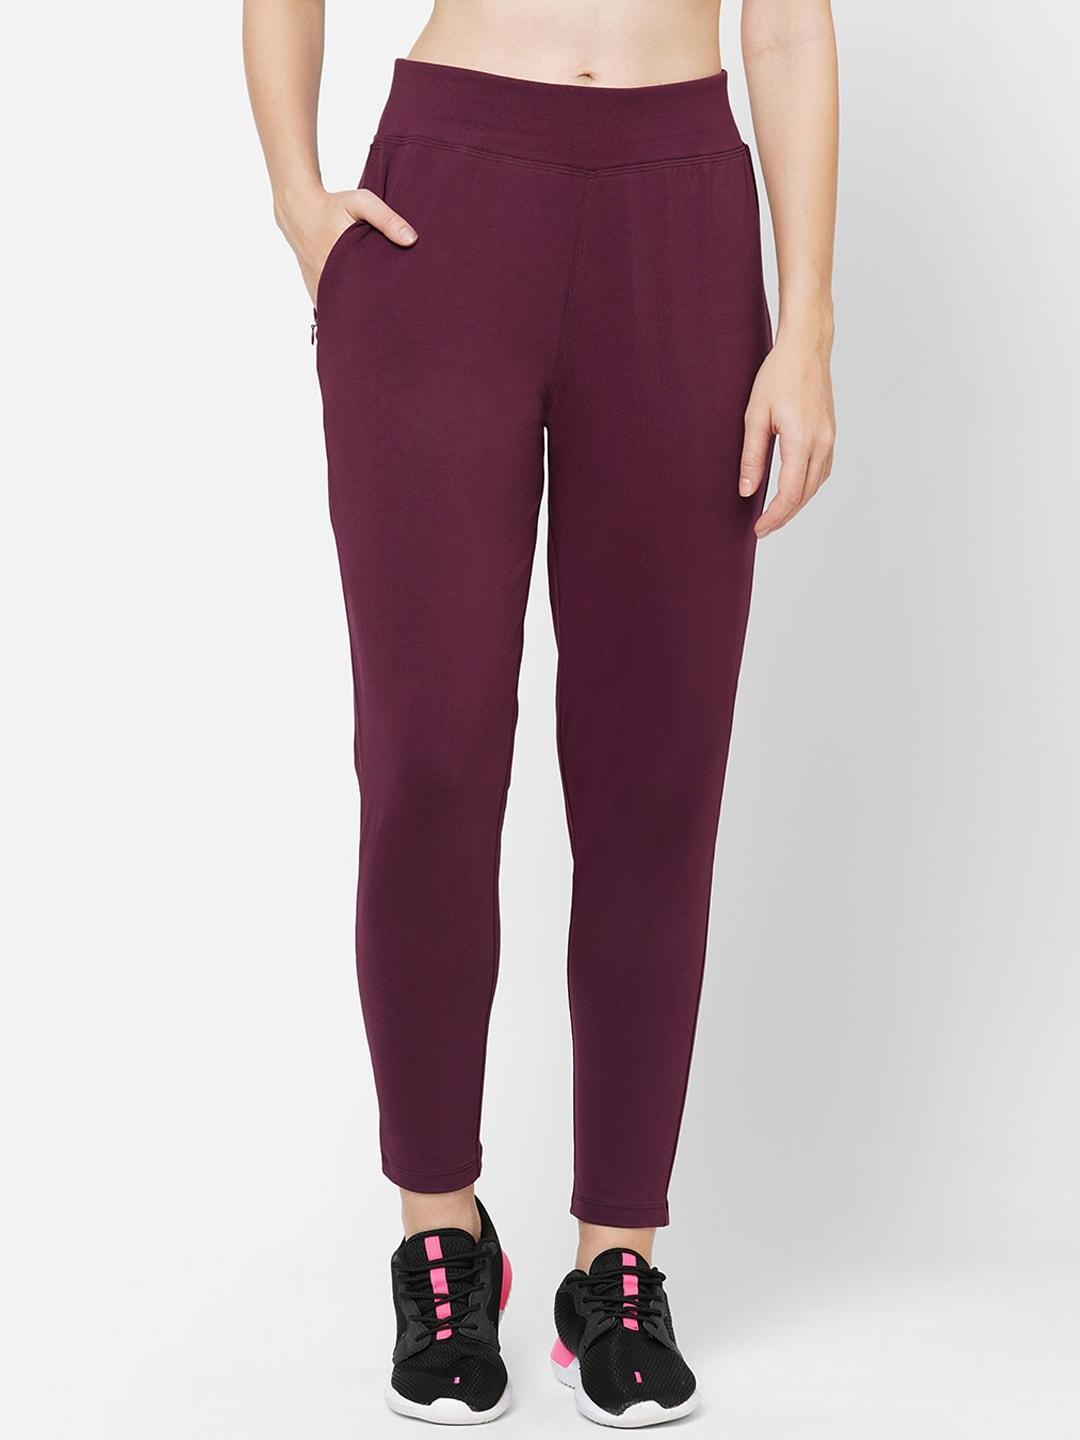 maysixty-women-maroon-solid-slim-fit-cotton-track-pants